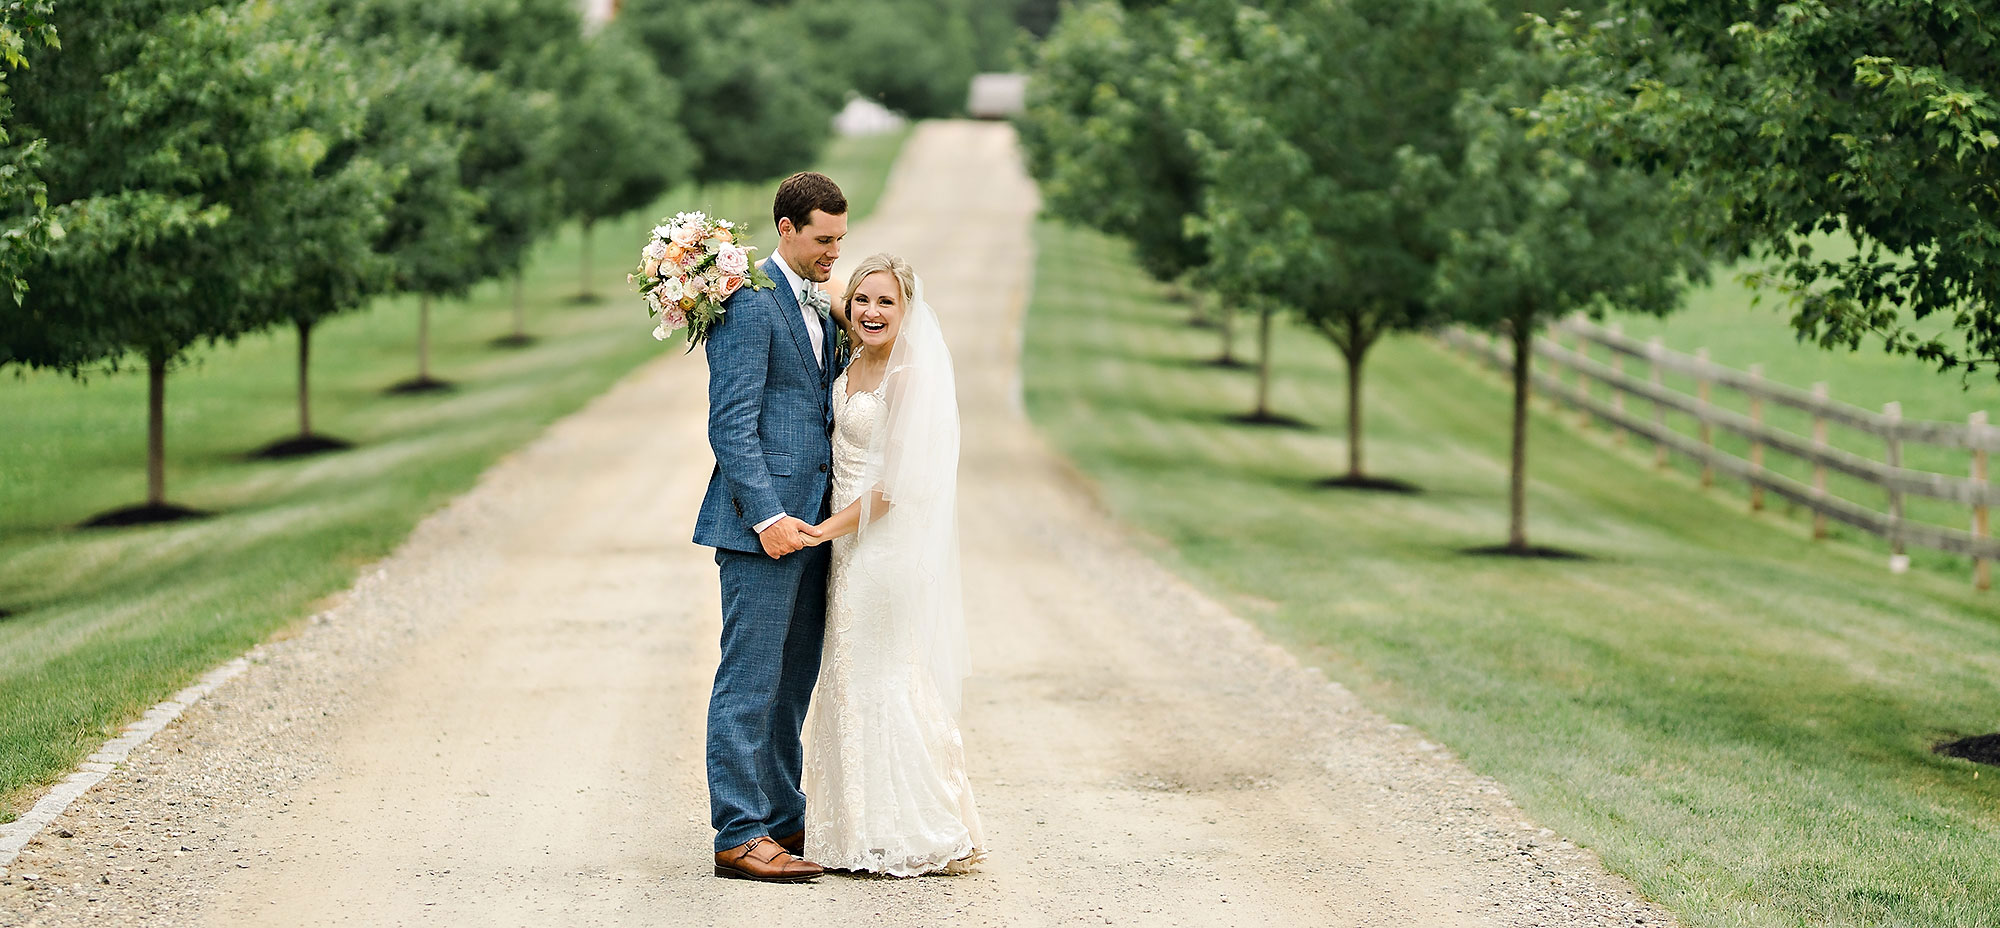 June farms wedding by elario photography bride and groom with trees on the side of the road